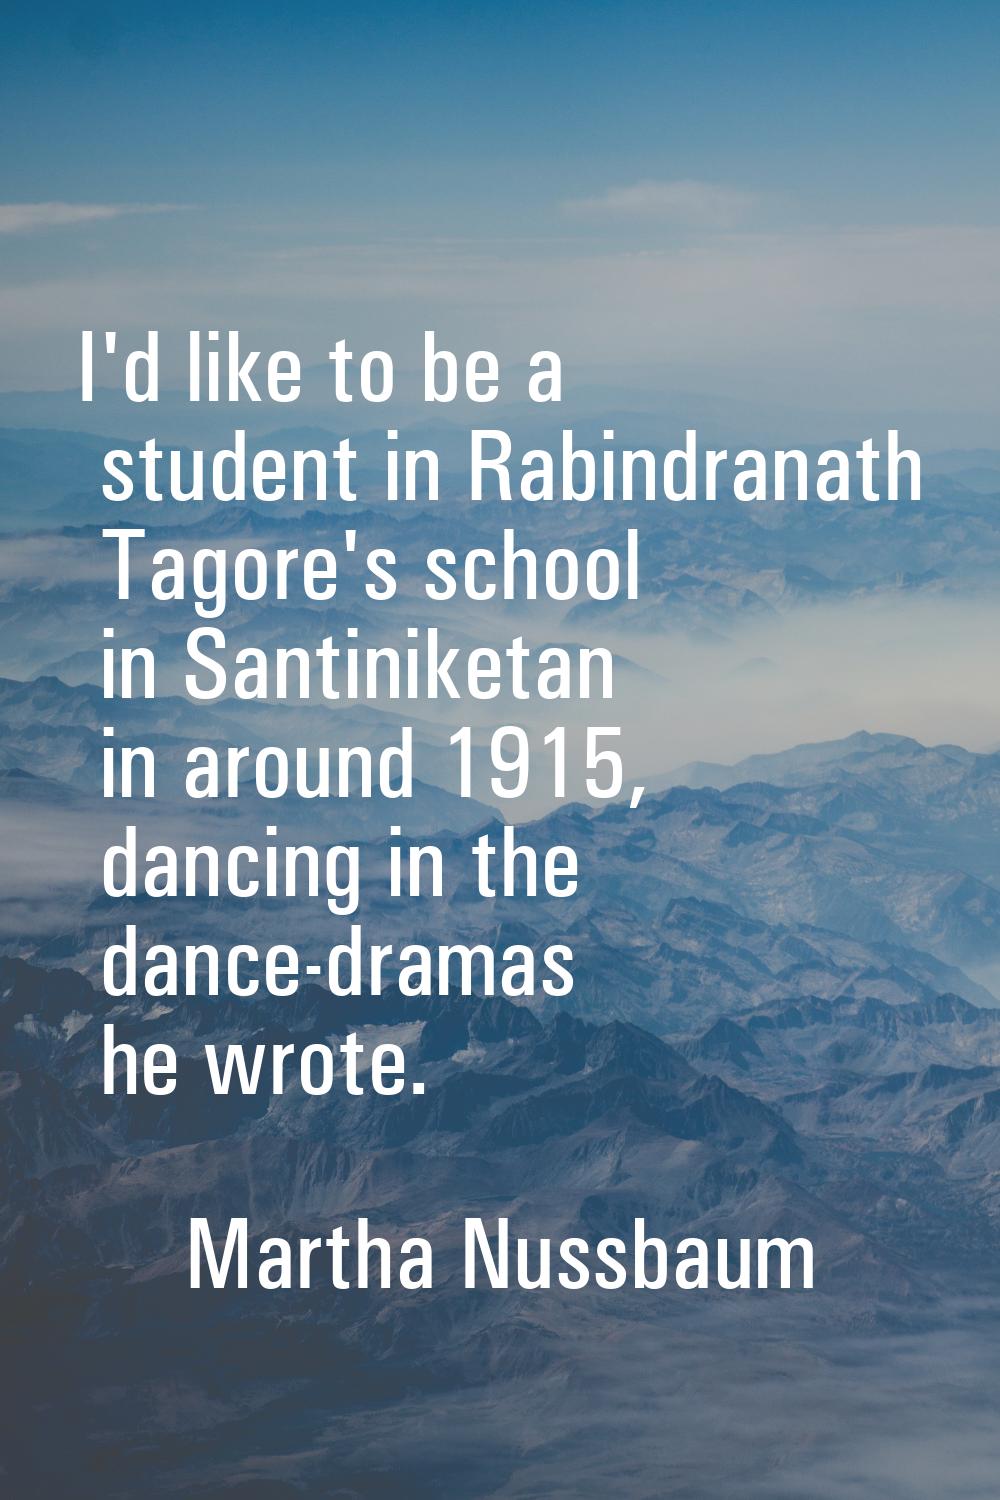 I'd like to be a student in Rabindranath Tagore's school in Santiniketan in around 1915, dancing in